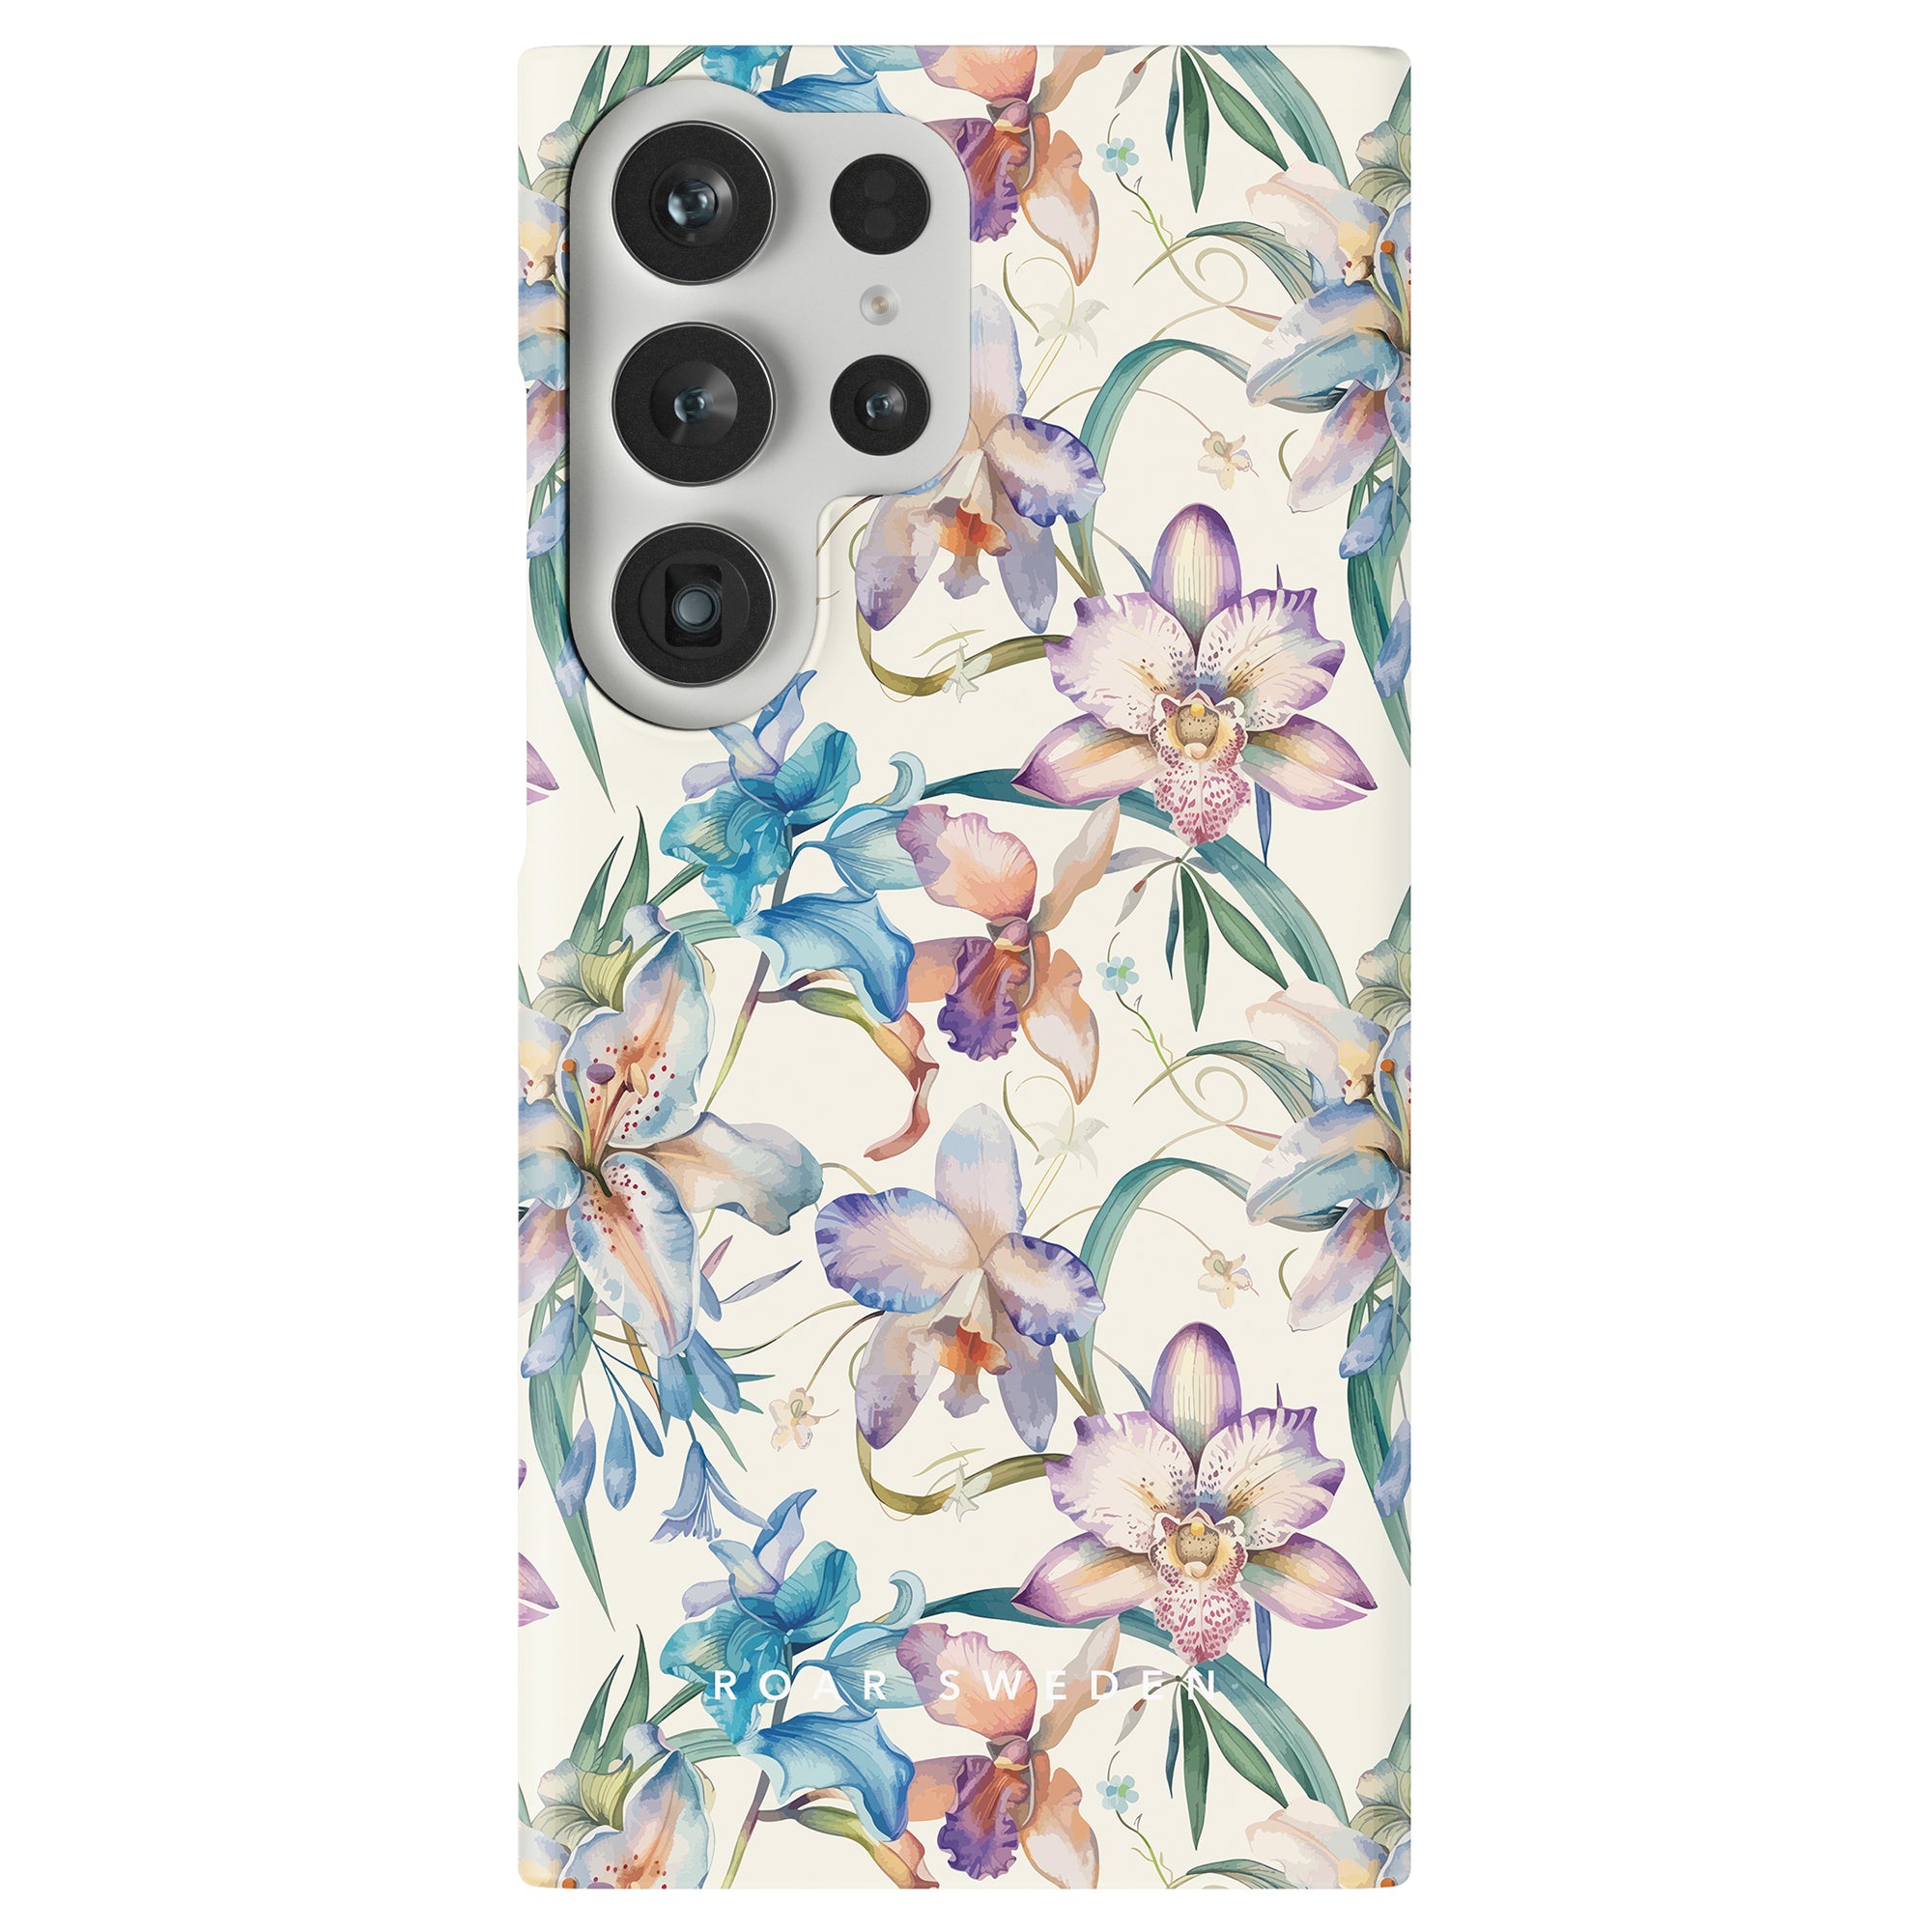 A smartphone from the Floral Collection with a Bouquet - Slim case featuring various colorful flowers on a white background, providing stylish smartphone protection.